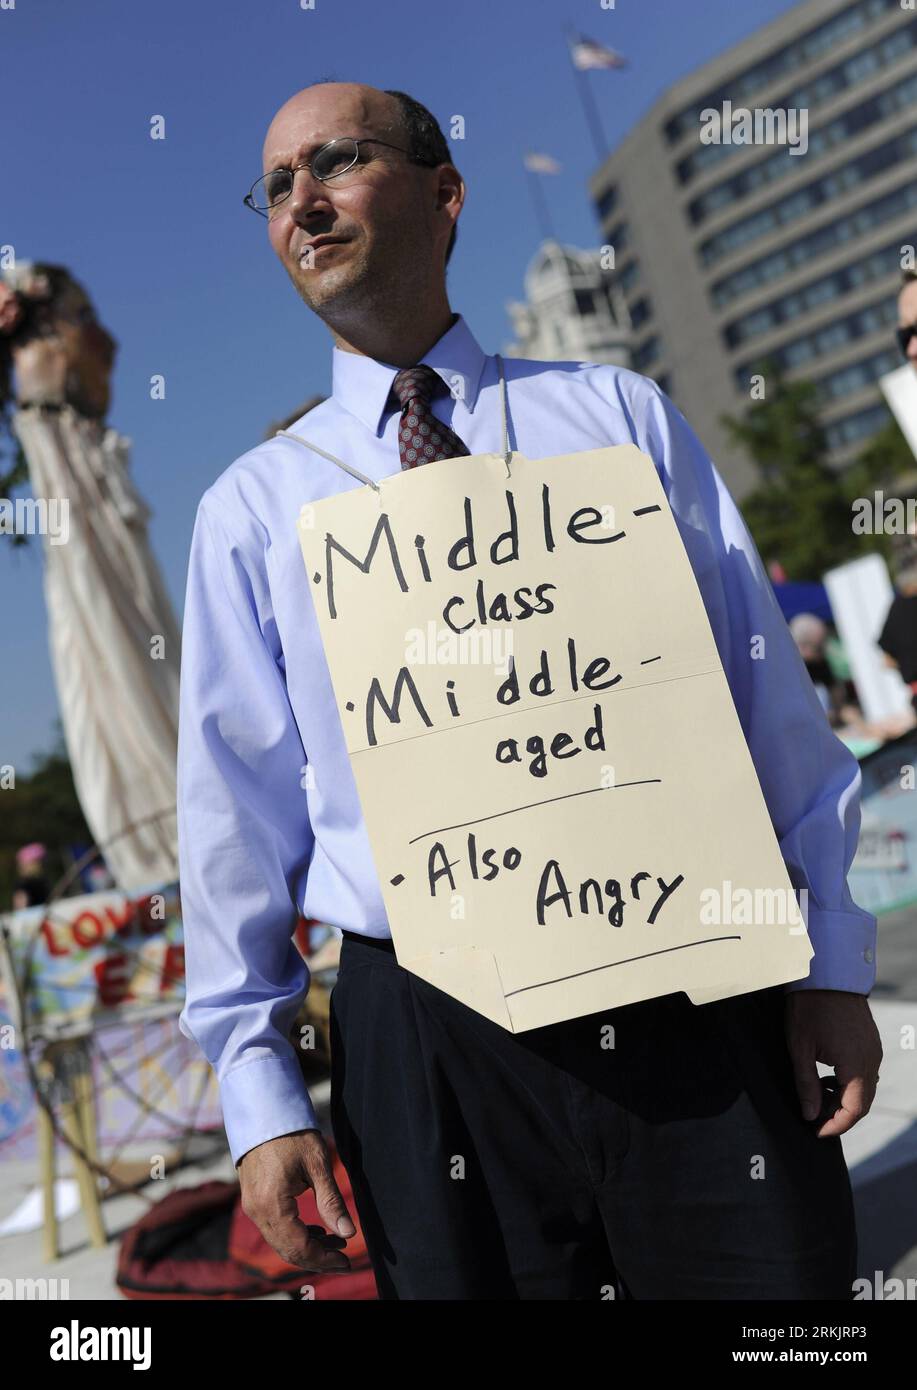 Bildnummer: 56159484  Datum: 08.10.2011  Copyright: imago/Xinhua (111008) -- WASHINGTON, Oct. 8, 2011 (Xinhua) -- A protestor holds a placard with Middle class, Middle aged, Also Angry during the Occupy D.C. movement at the Freedom Plaza in downtown Washington D.C., capital of the United States, Oct. 8, 2011. Inspired by Occupy Wall Street movement in New York, activists in Washington continued the Occupy D.C. movement on its third day, an offshoot of the occupy movement that s been going on around the country. (Xinhua/Zhang Jun) US-WASHINGTON-OCCUPY D.C.-PROTEST PUBLICATIONxNOTxINxCHN Gesells Stock Photo